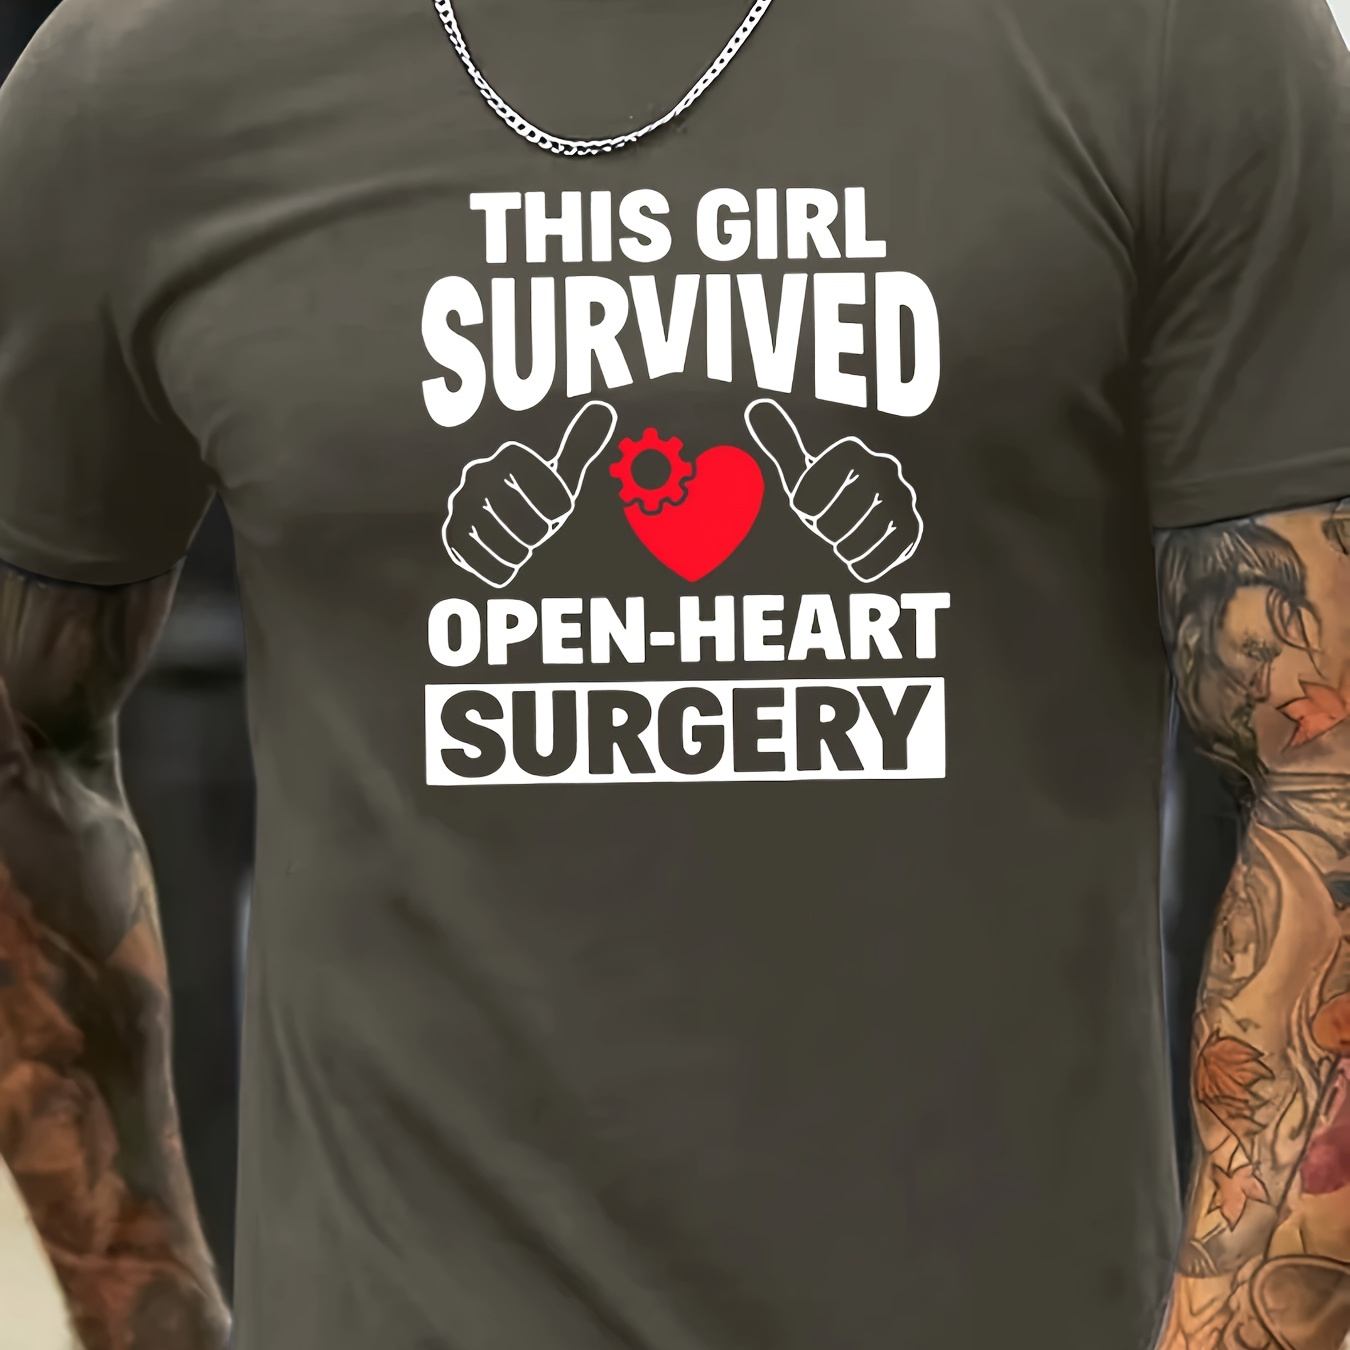 

This Girl Survived Open-heart Surgery Print T Shirt, Tees For Men, Casual Short Sleeve T-shirt For Summer